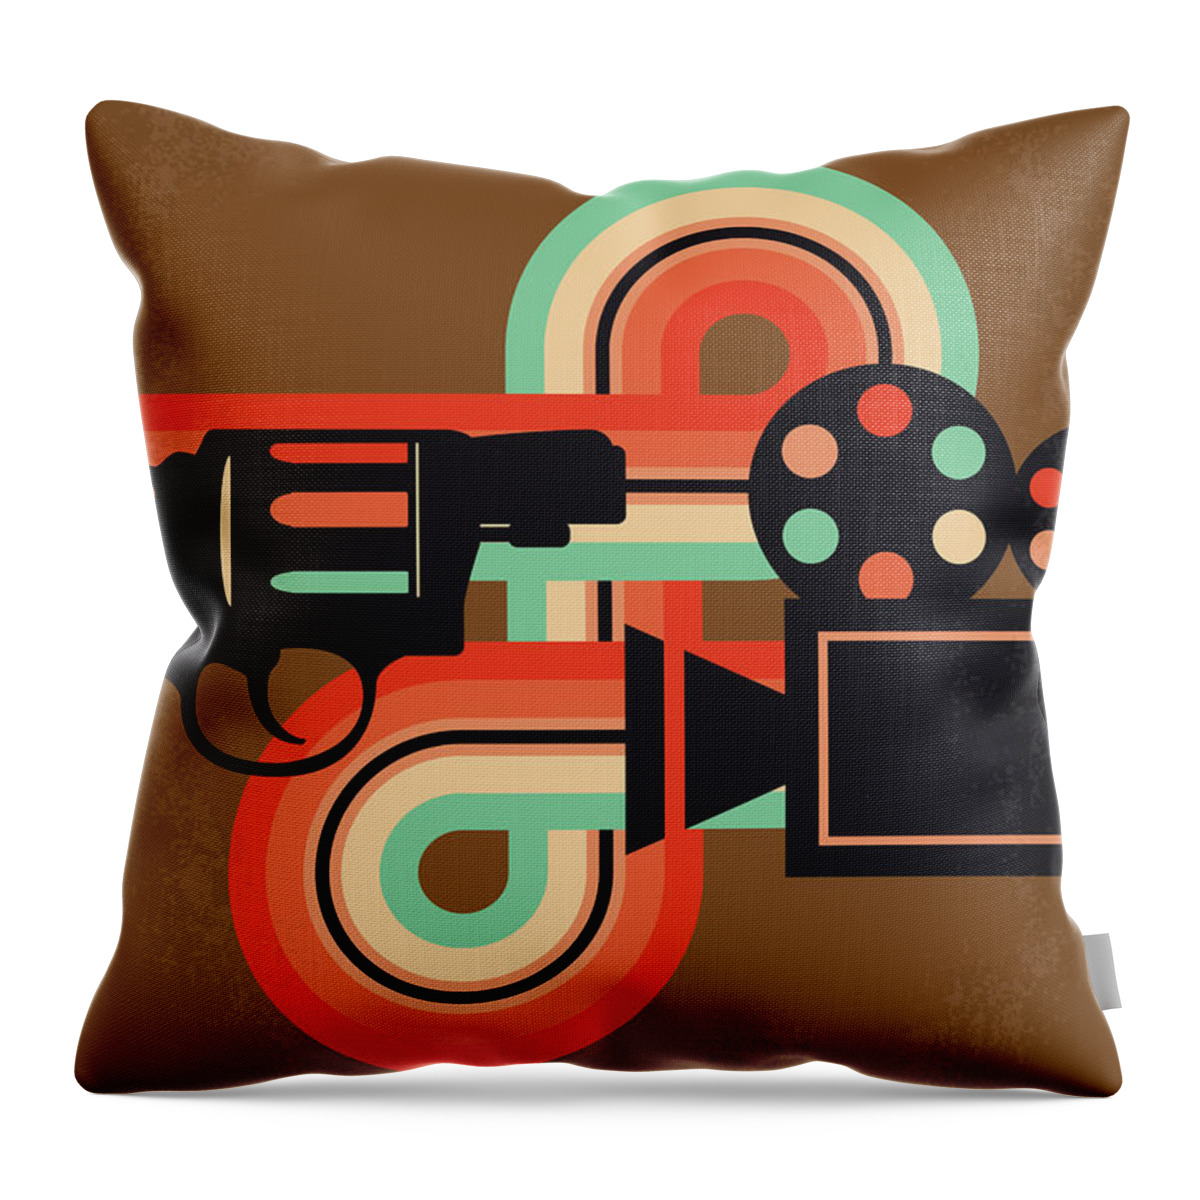 The Nice Guys Throw Pillow featuring the digital art No1180 My The Nice Guys minimal movie poster by Chungkong Art